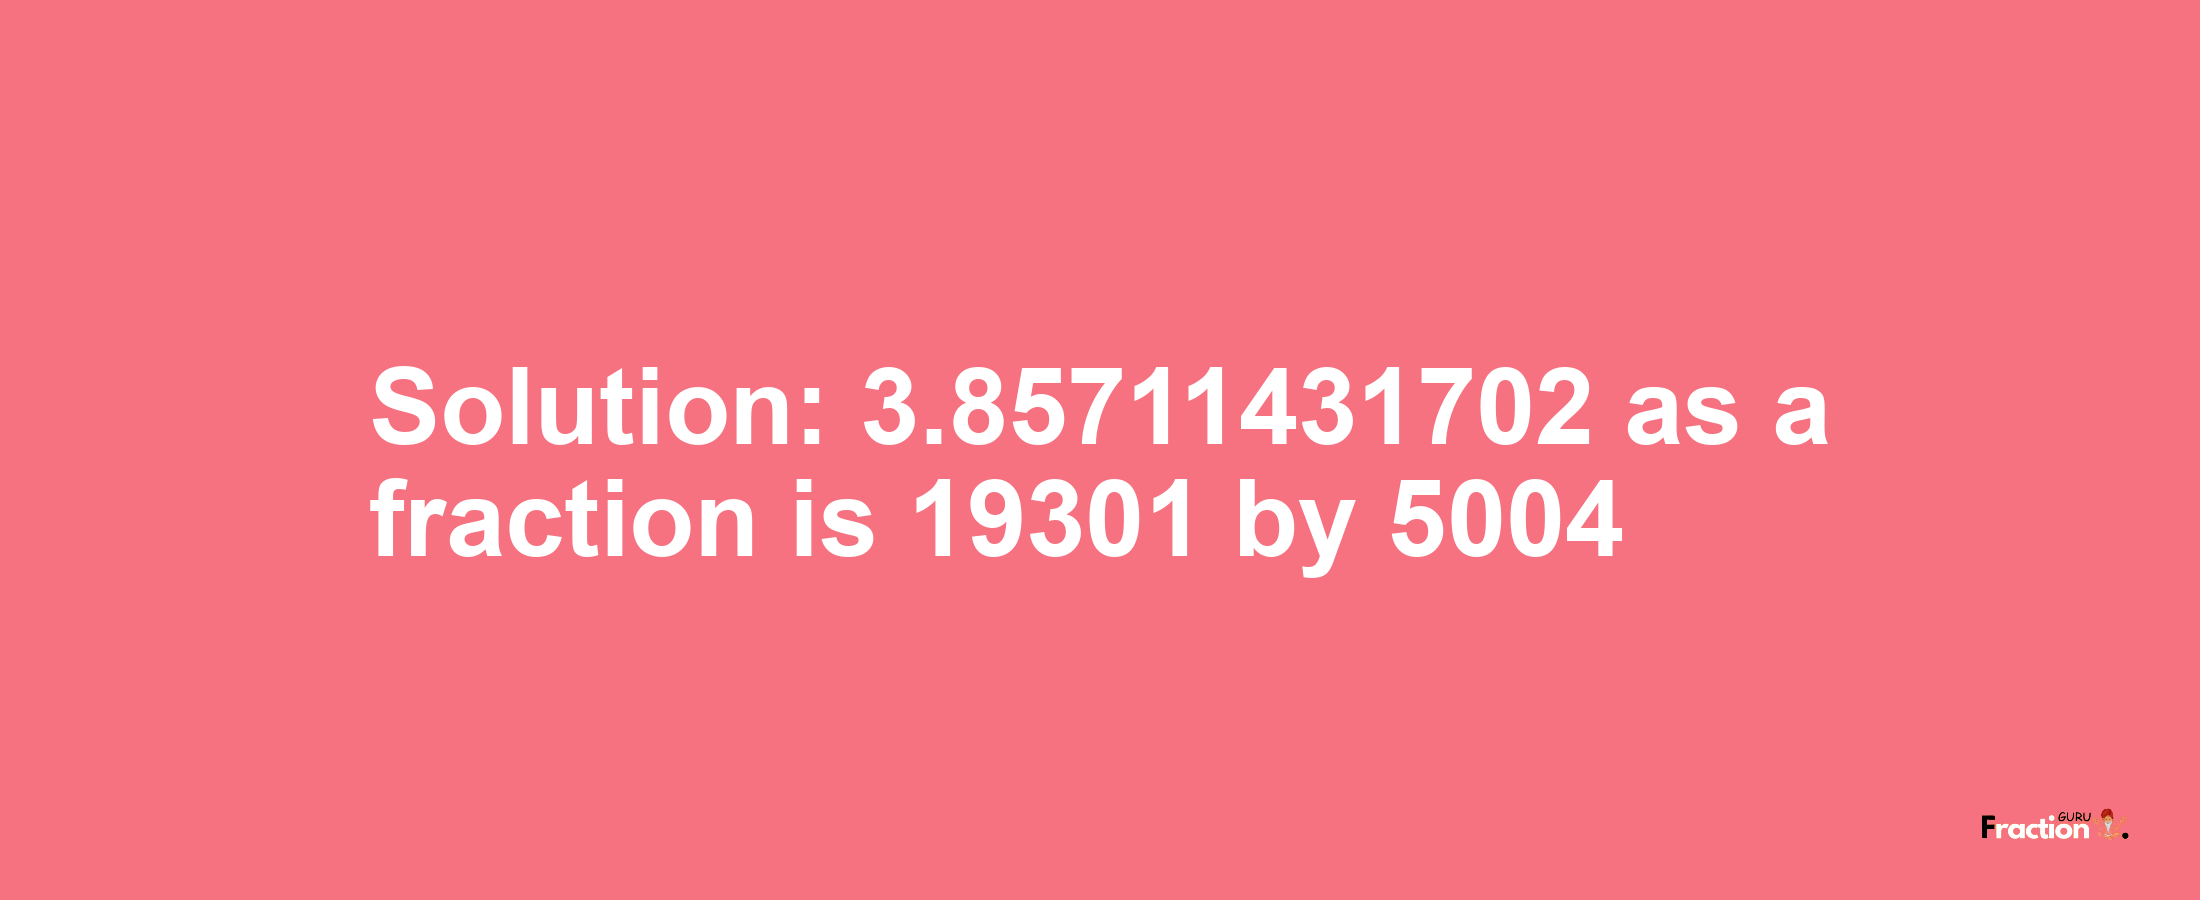 Solution:3.85711431702 as a fraction is 19301/5004